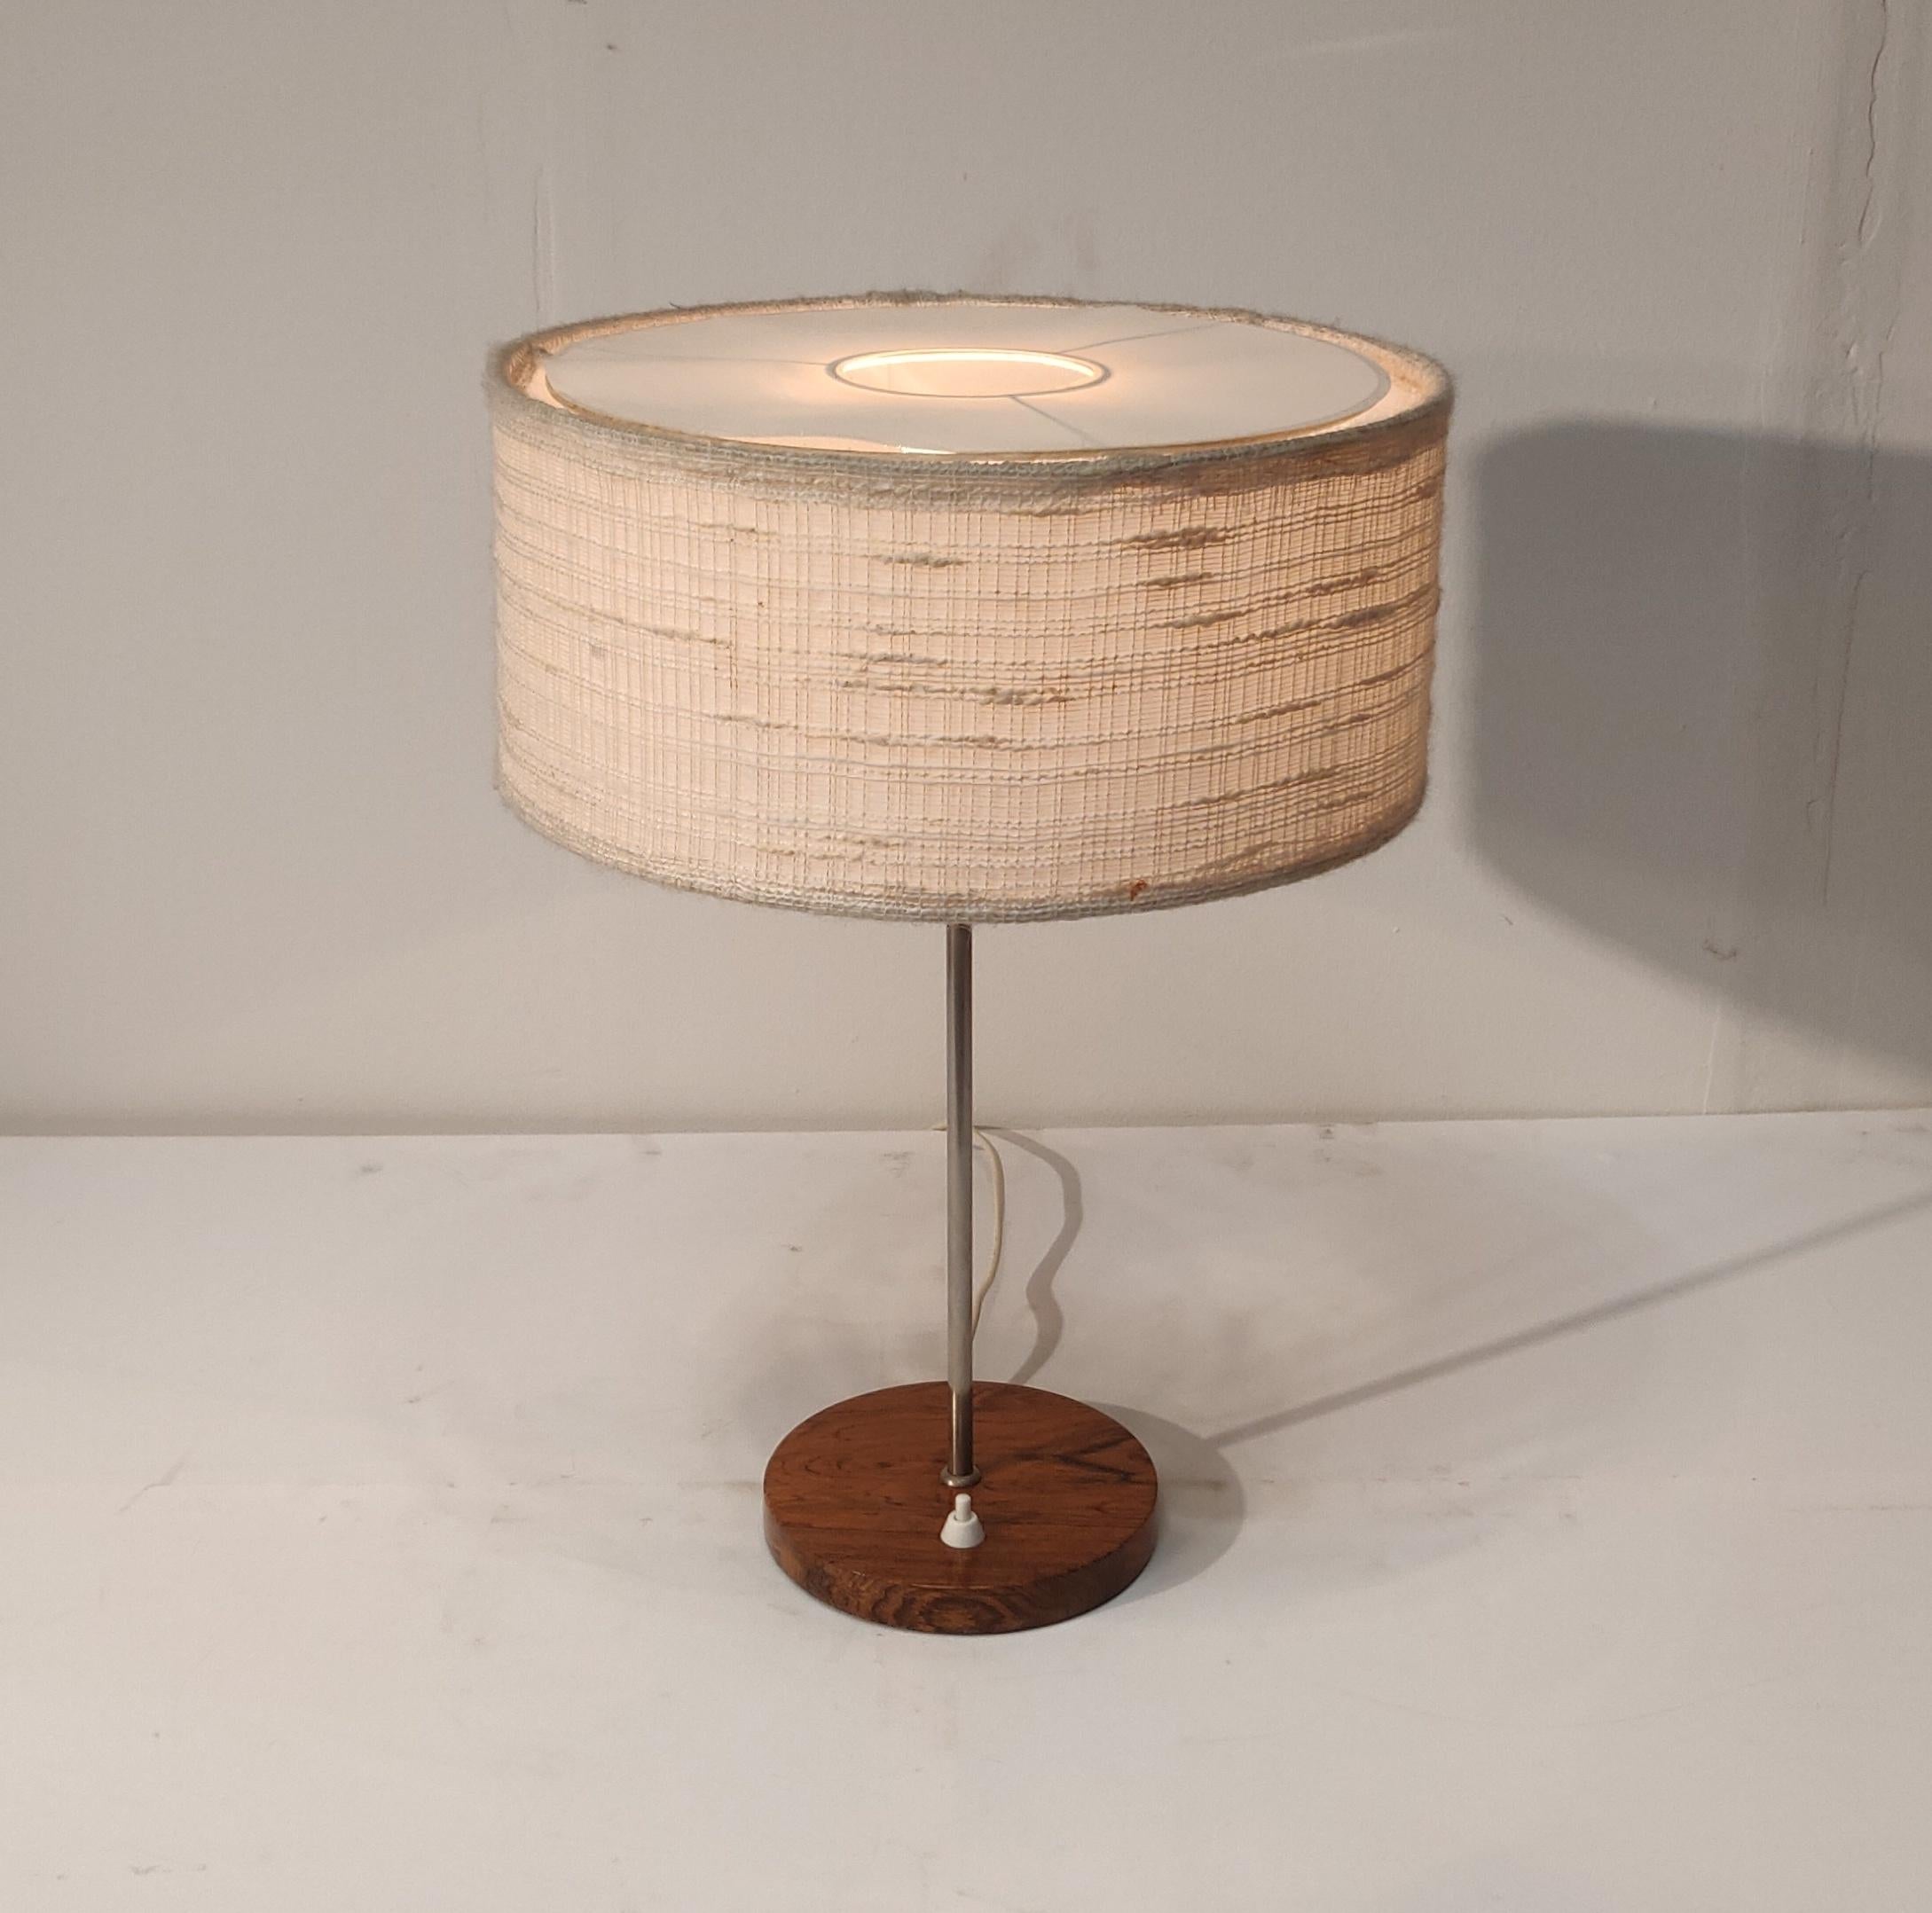 Scandinavian Modern desk lamp, wooden base and fitting, typical mid century modern shade. 